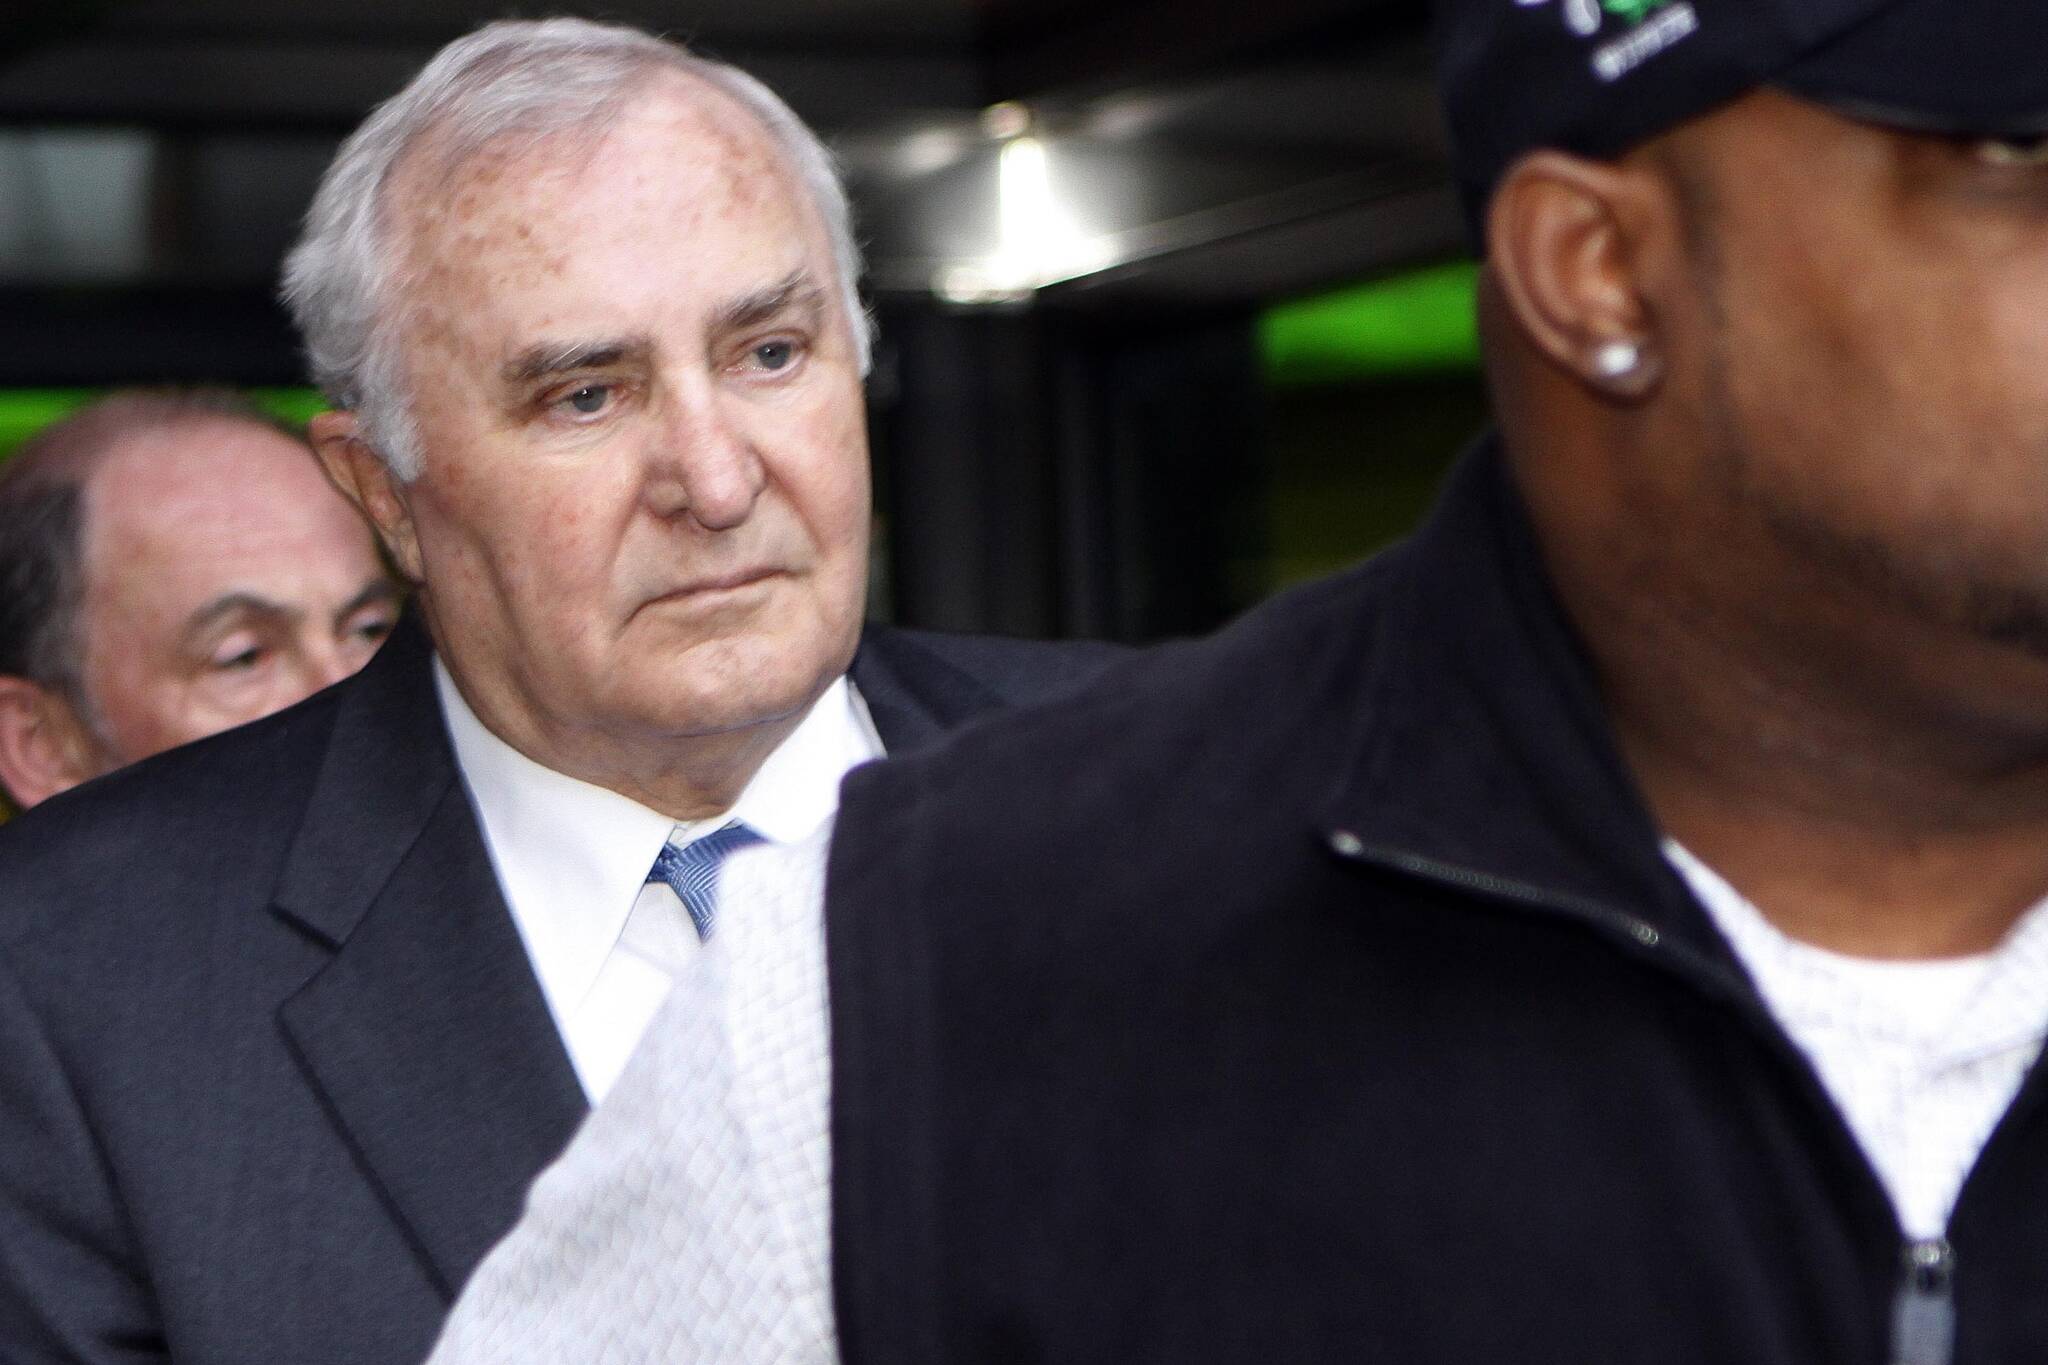 Bill Allen, former chief executive of VECO Corp. leaves federal court on Oct. 28, 2009 in Anchorage. Allen, a former oil services executive who was a key figure in a corruption scandal that rocked Alaska politics, has died. He was 85. (AP Photo  /Al Grillo, File)